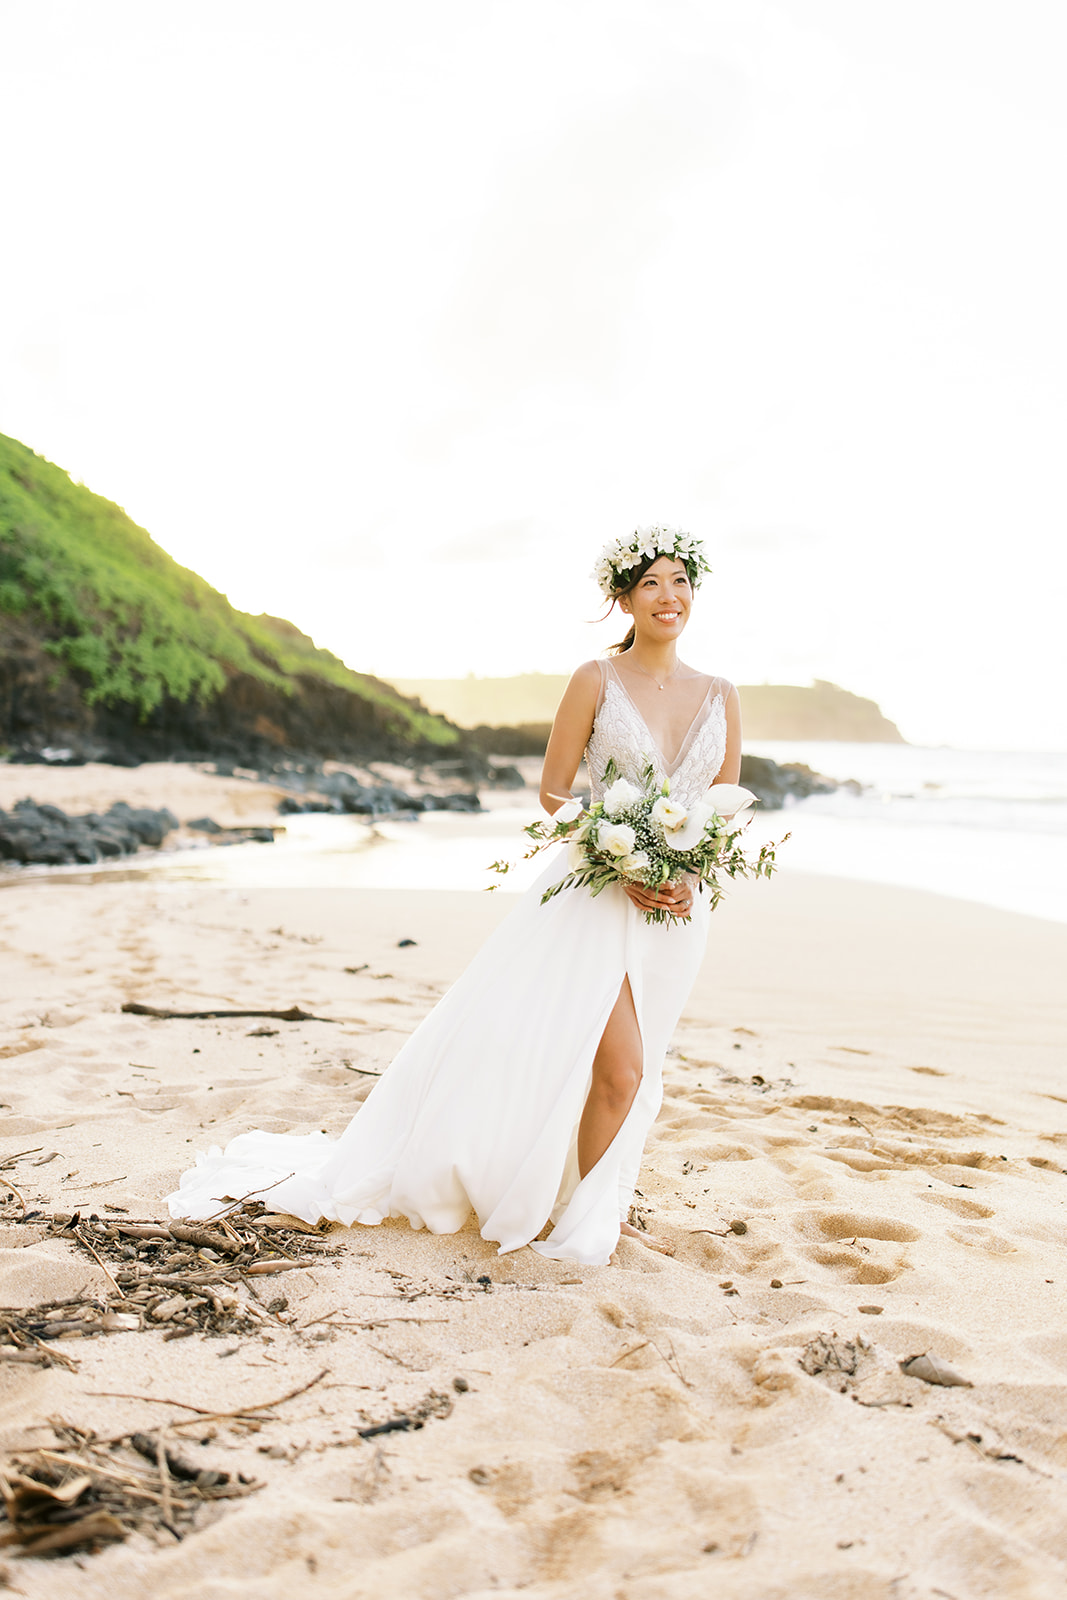 Bride in white dress and floral wreath standing on a beach at Na ‘Āina Kai Botanical Gardens captured by Megan Moura